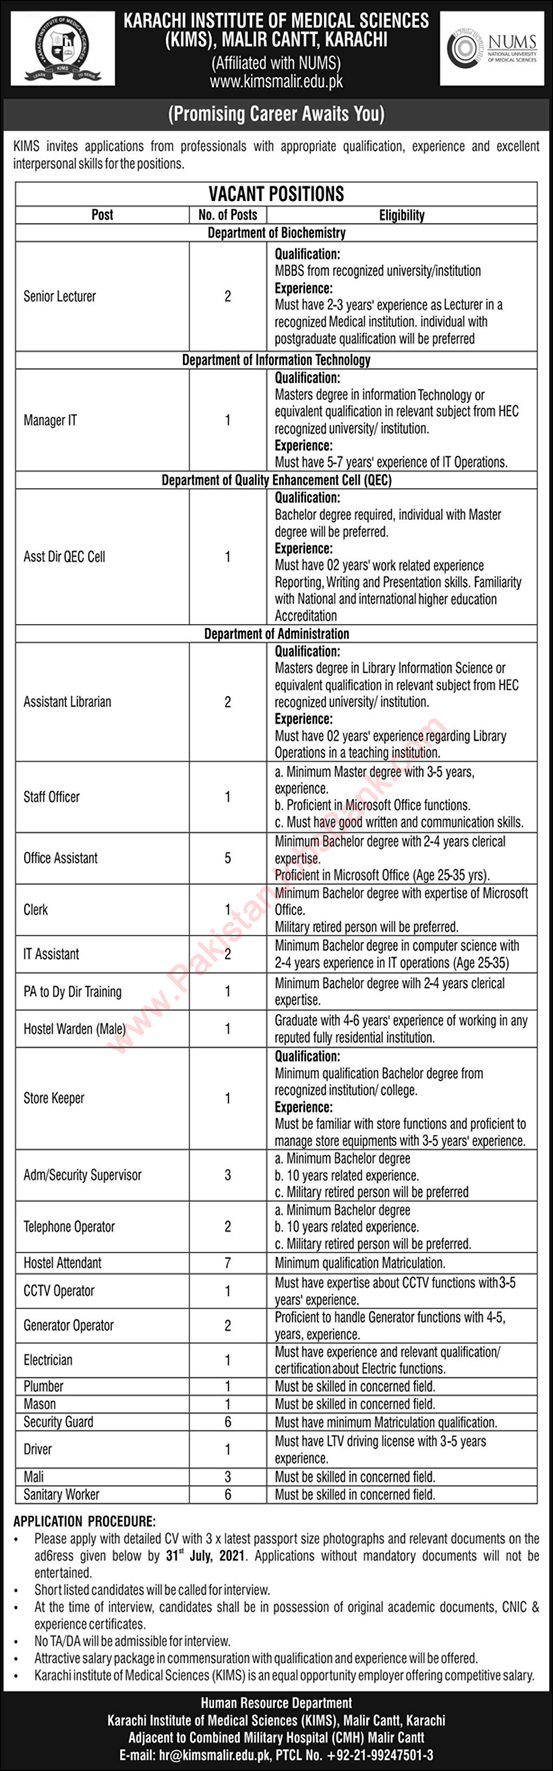 Karachi Institute of Medical Sciences Jobs 2021 July KIMS Assistants, Security Guards & Others Latest